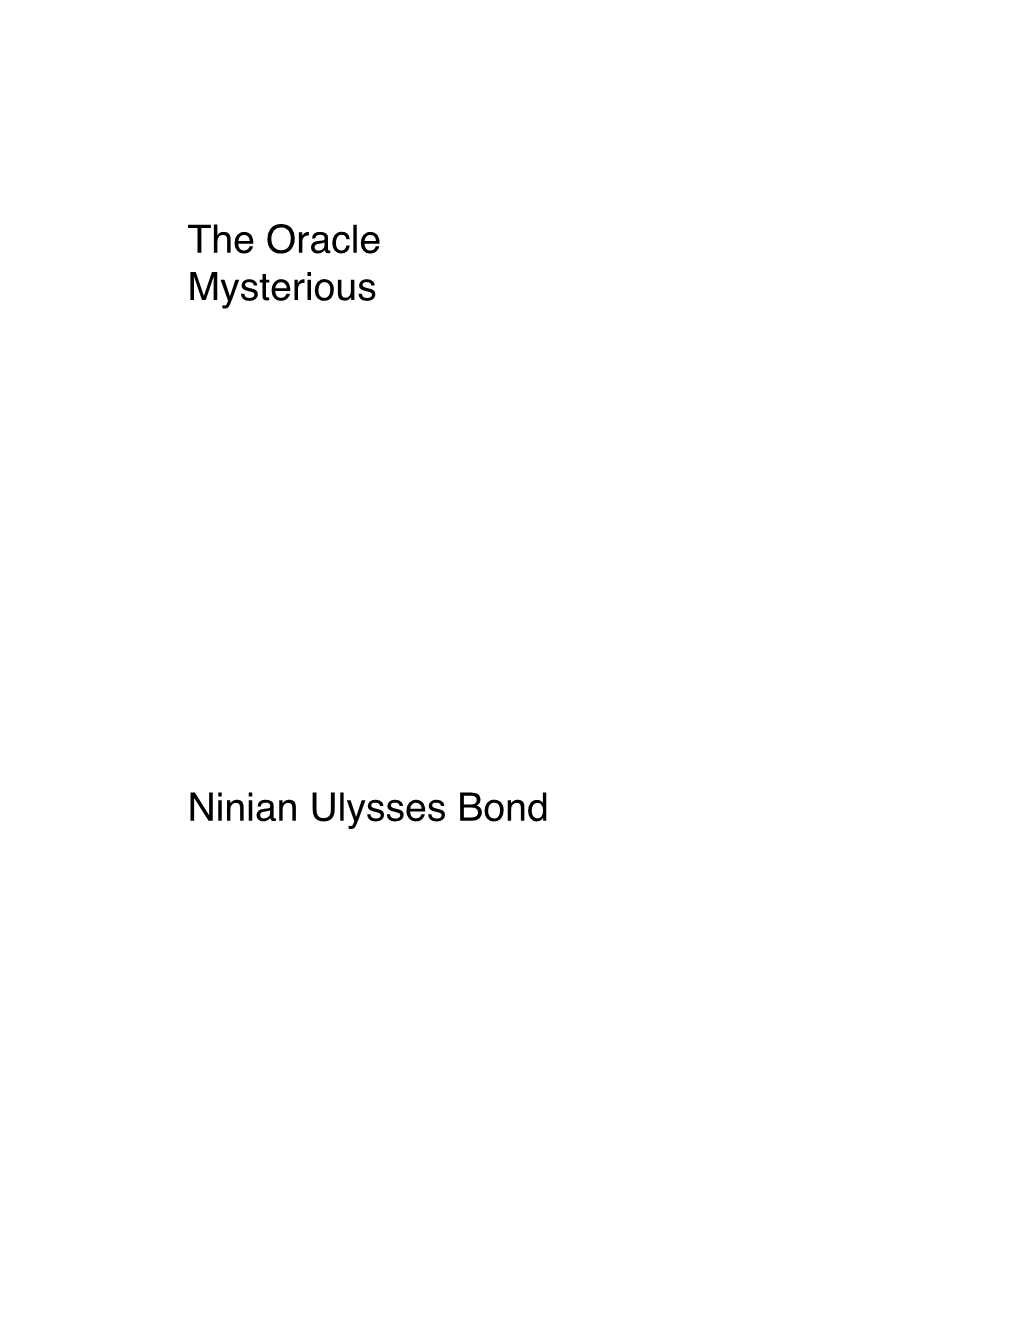 The Oracle Mysterious Ninian Ulysses Bond